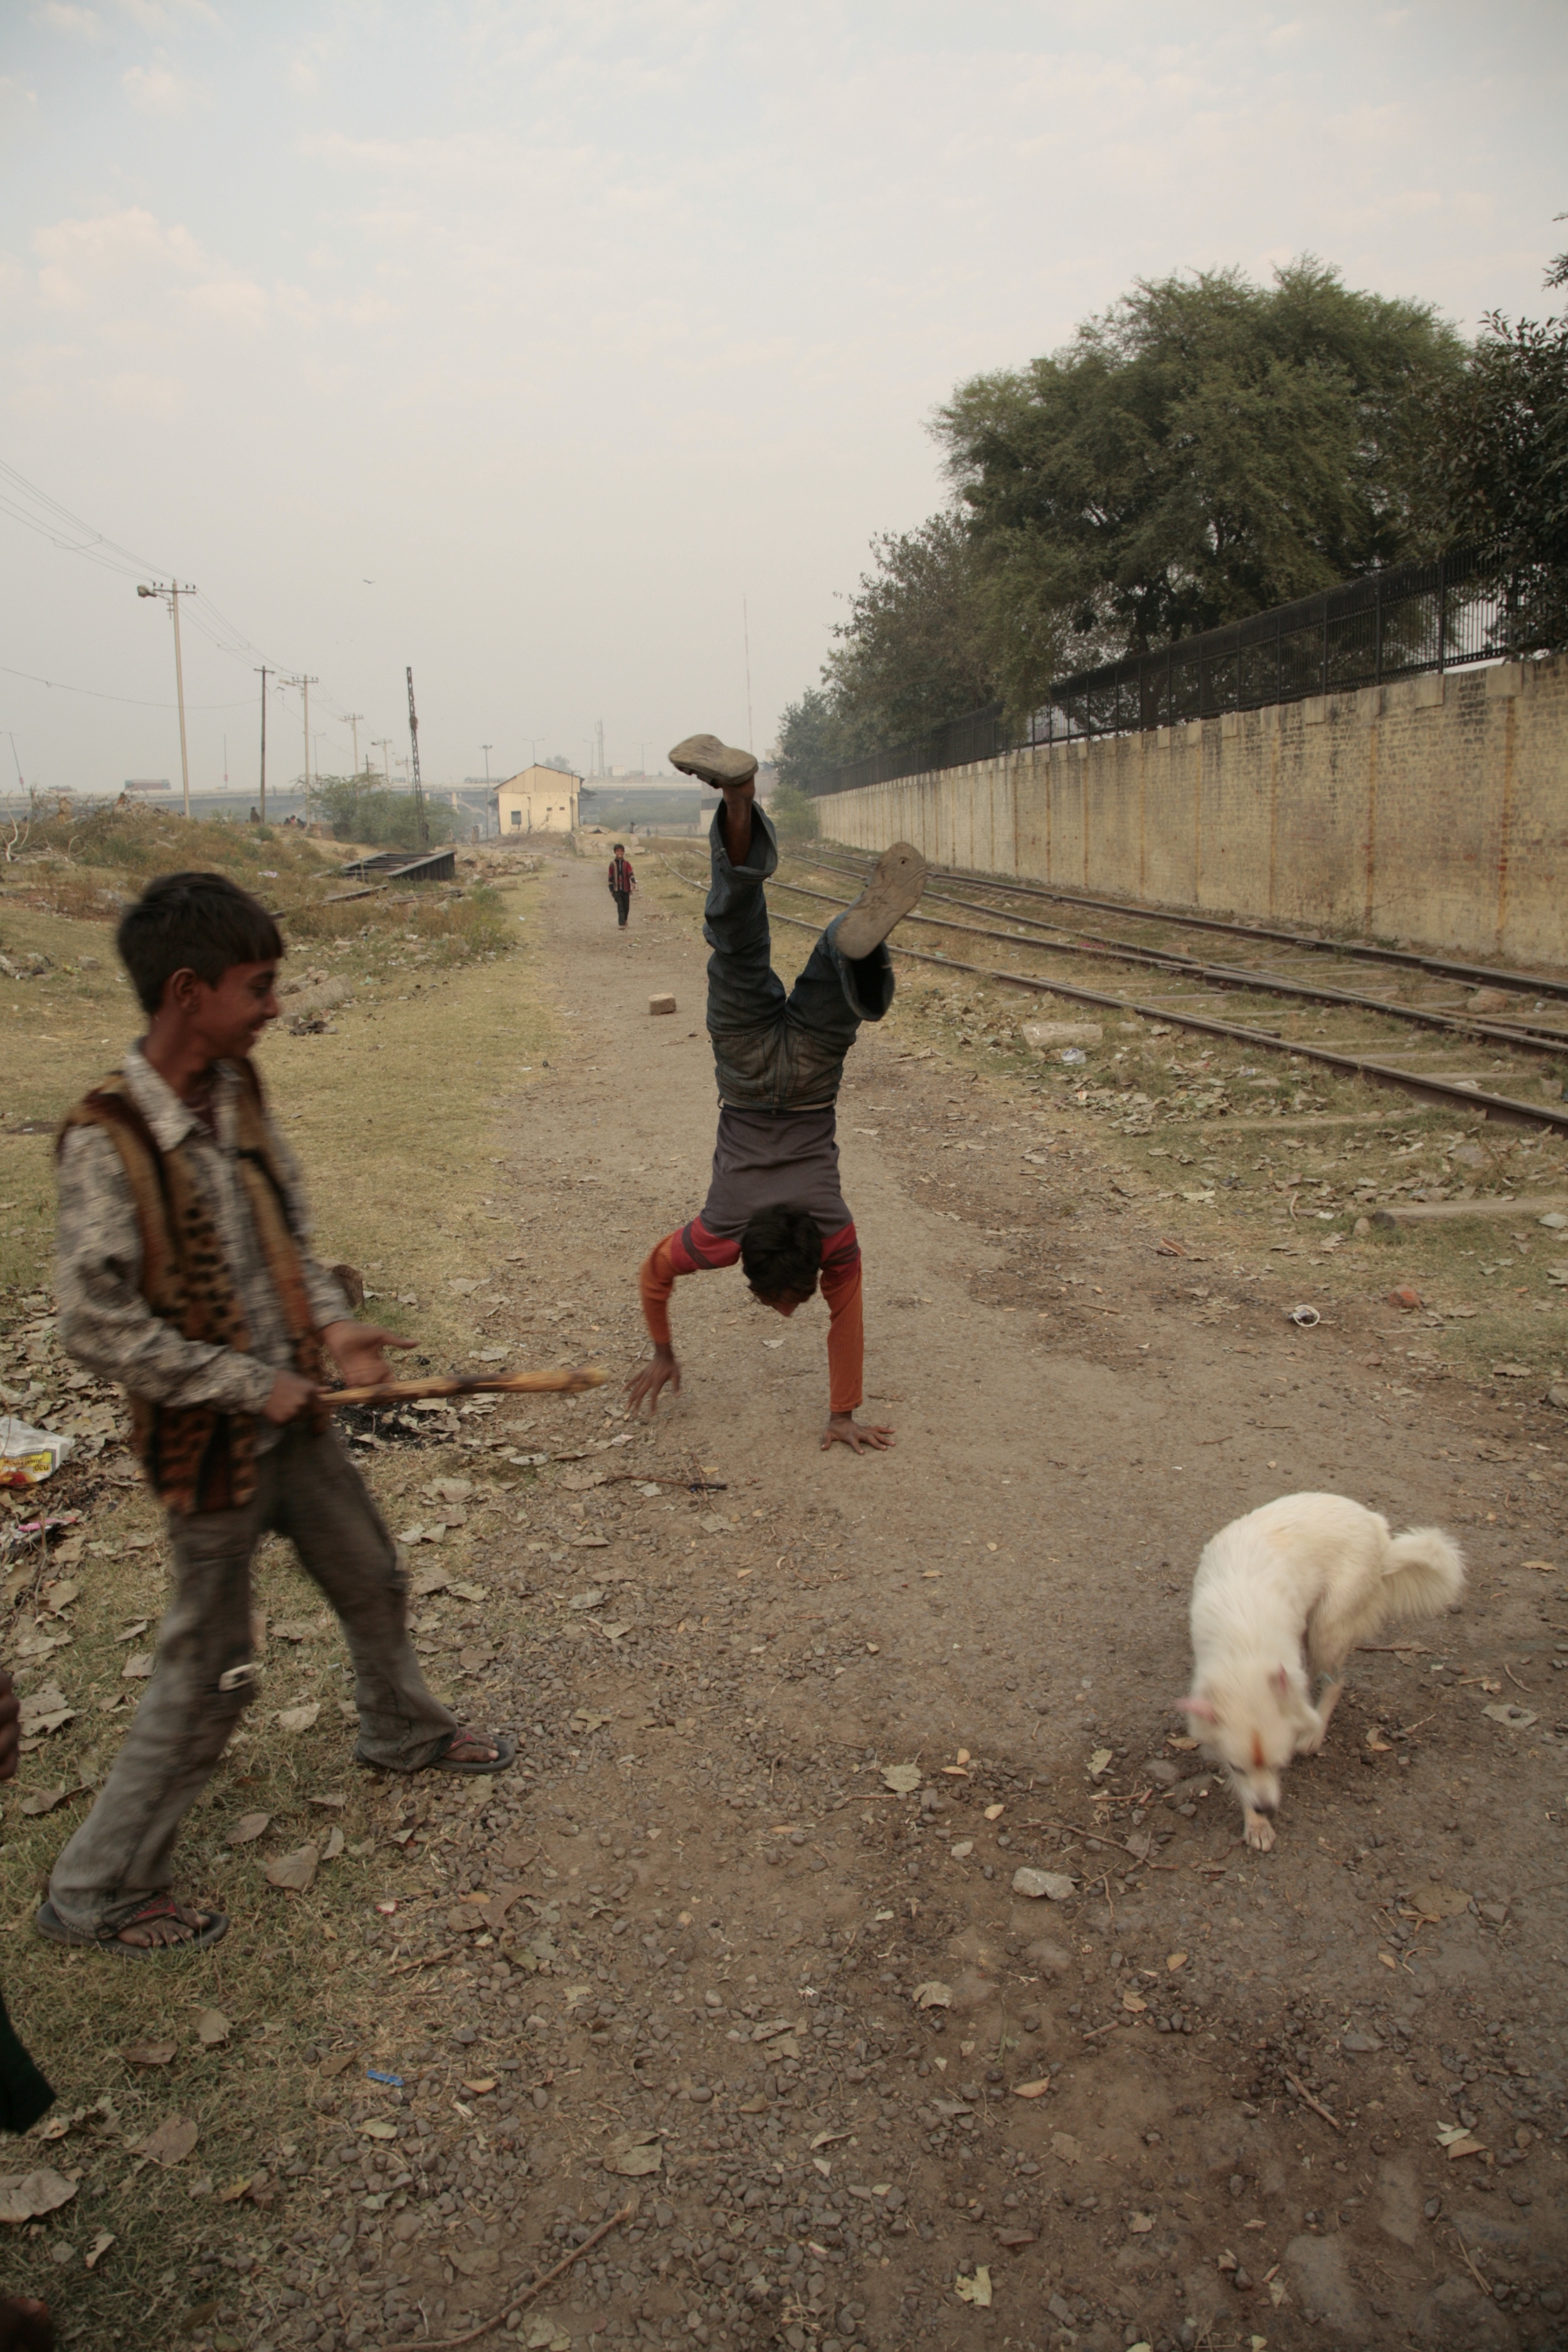 Delhi Railway Station, India - Photo courtesy of Dylan O'Donnell